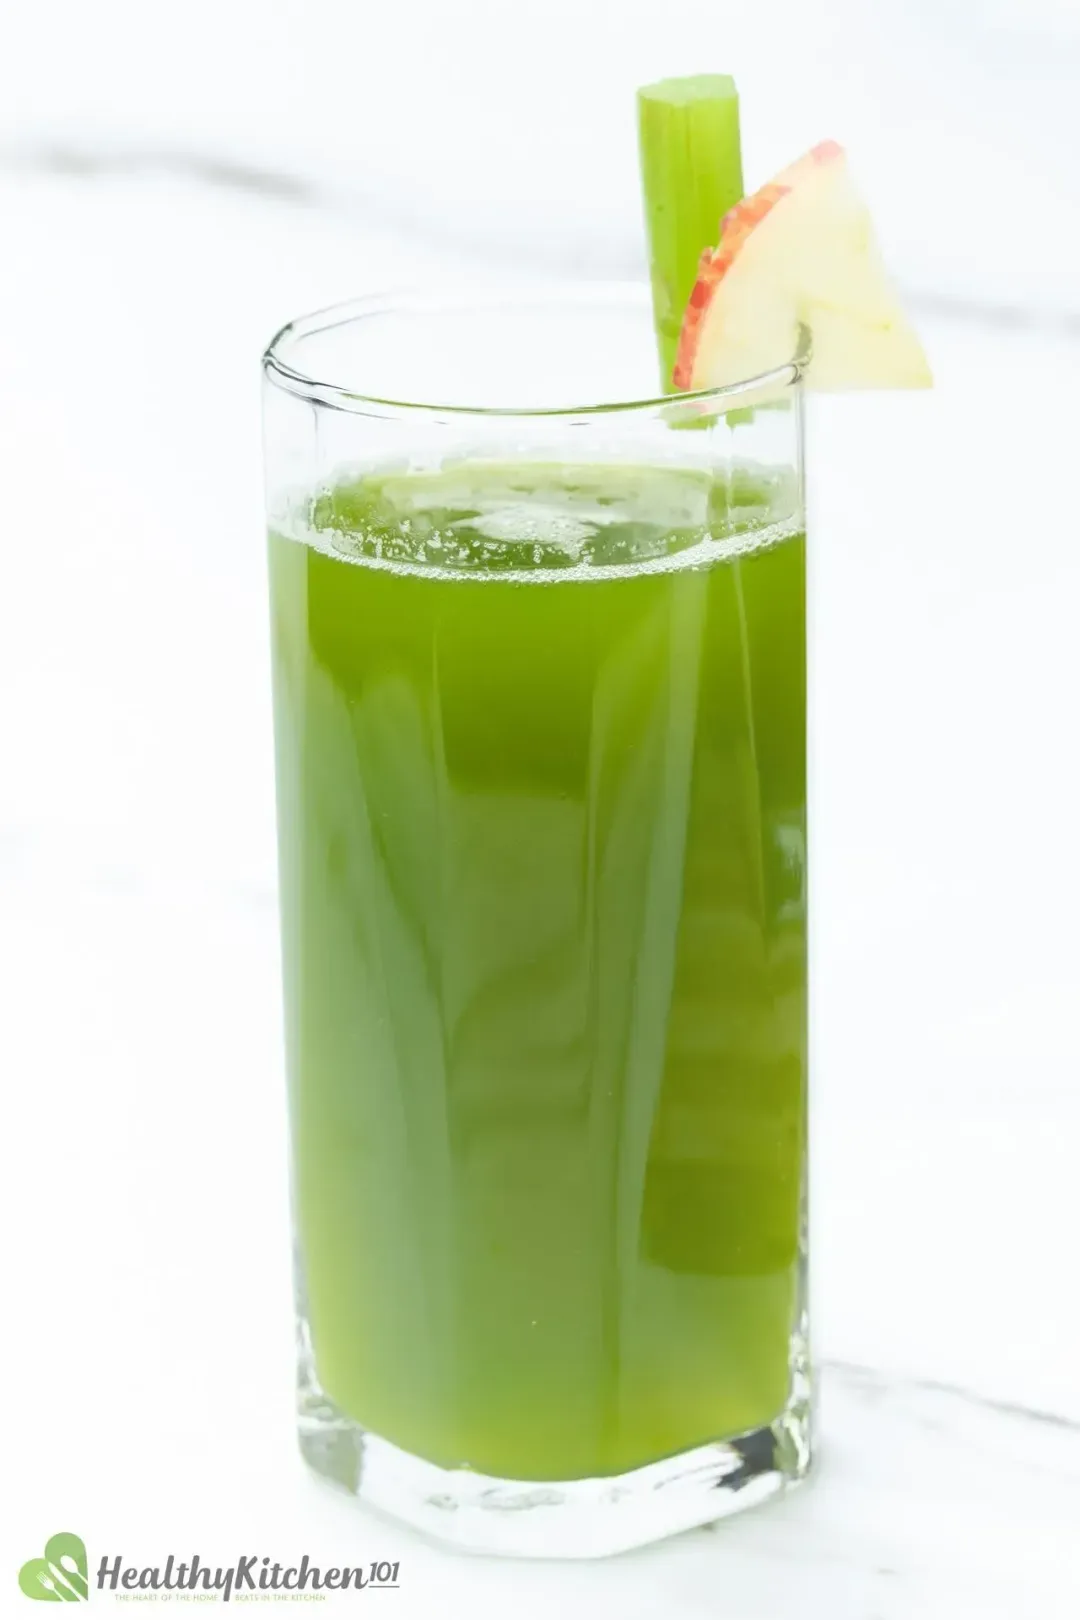 A glass of celery juice, with an apple slice and a celery stalk on the rim